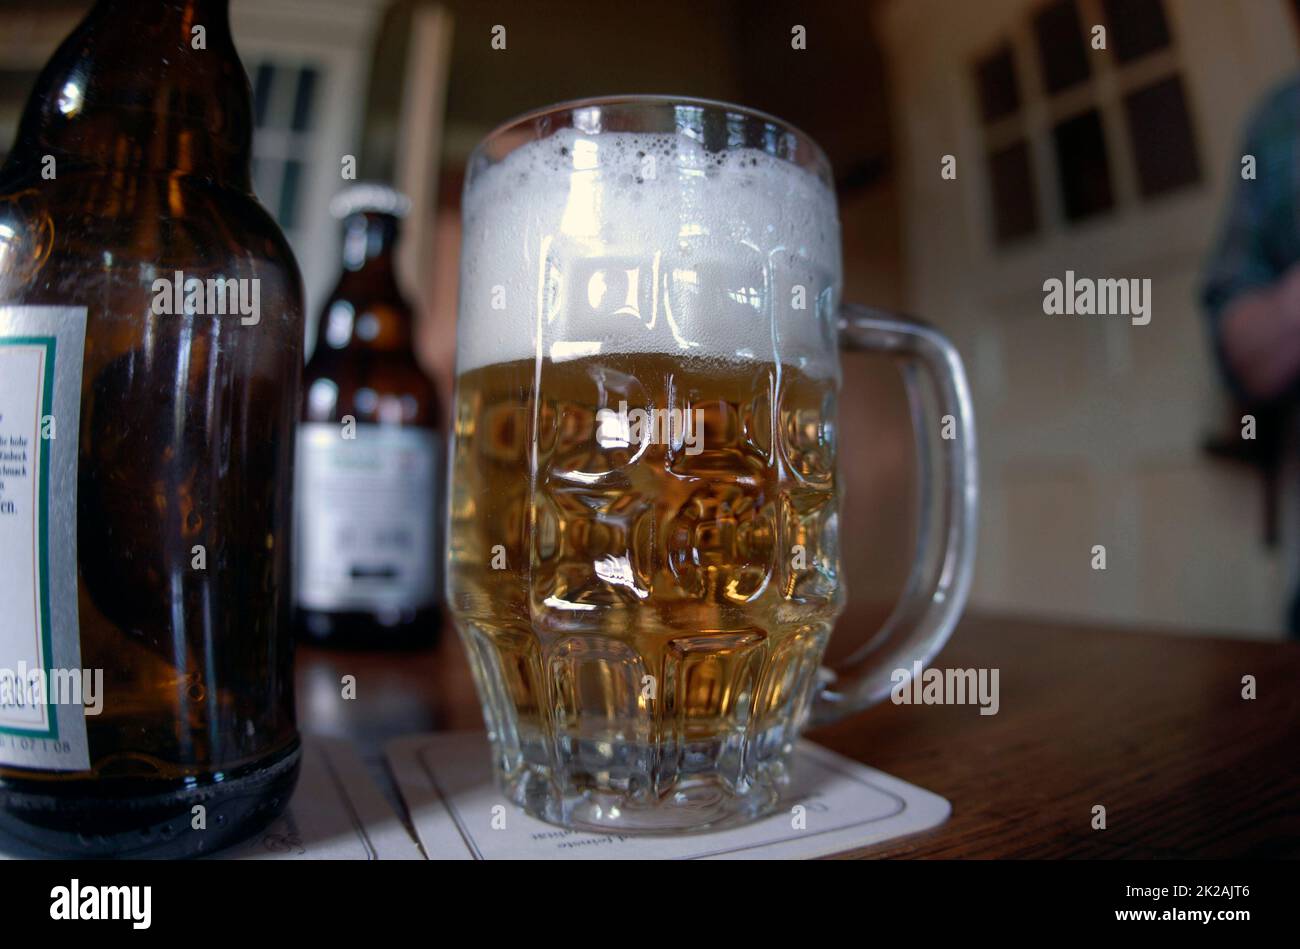 https://c8.alamy.com/comp/2K2AJT6/photo-on-the-theme-of-beer-and-beer-prices-2K2AJT6.jpg